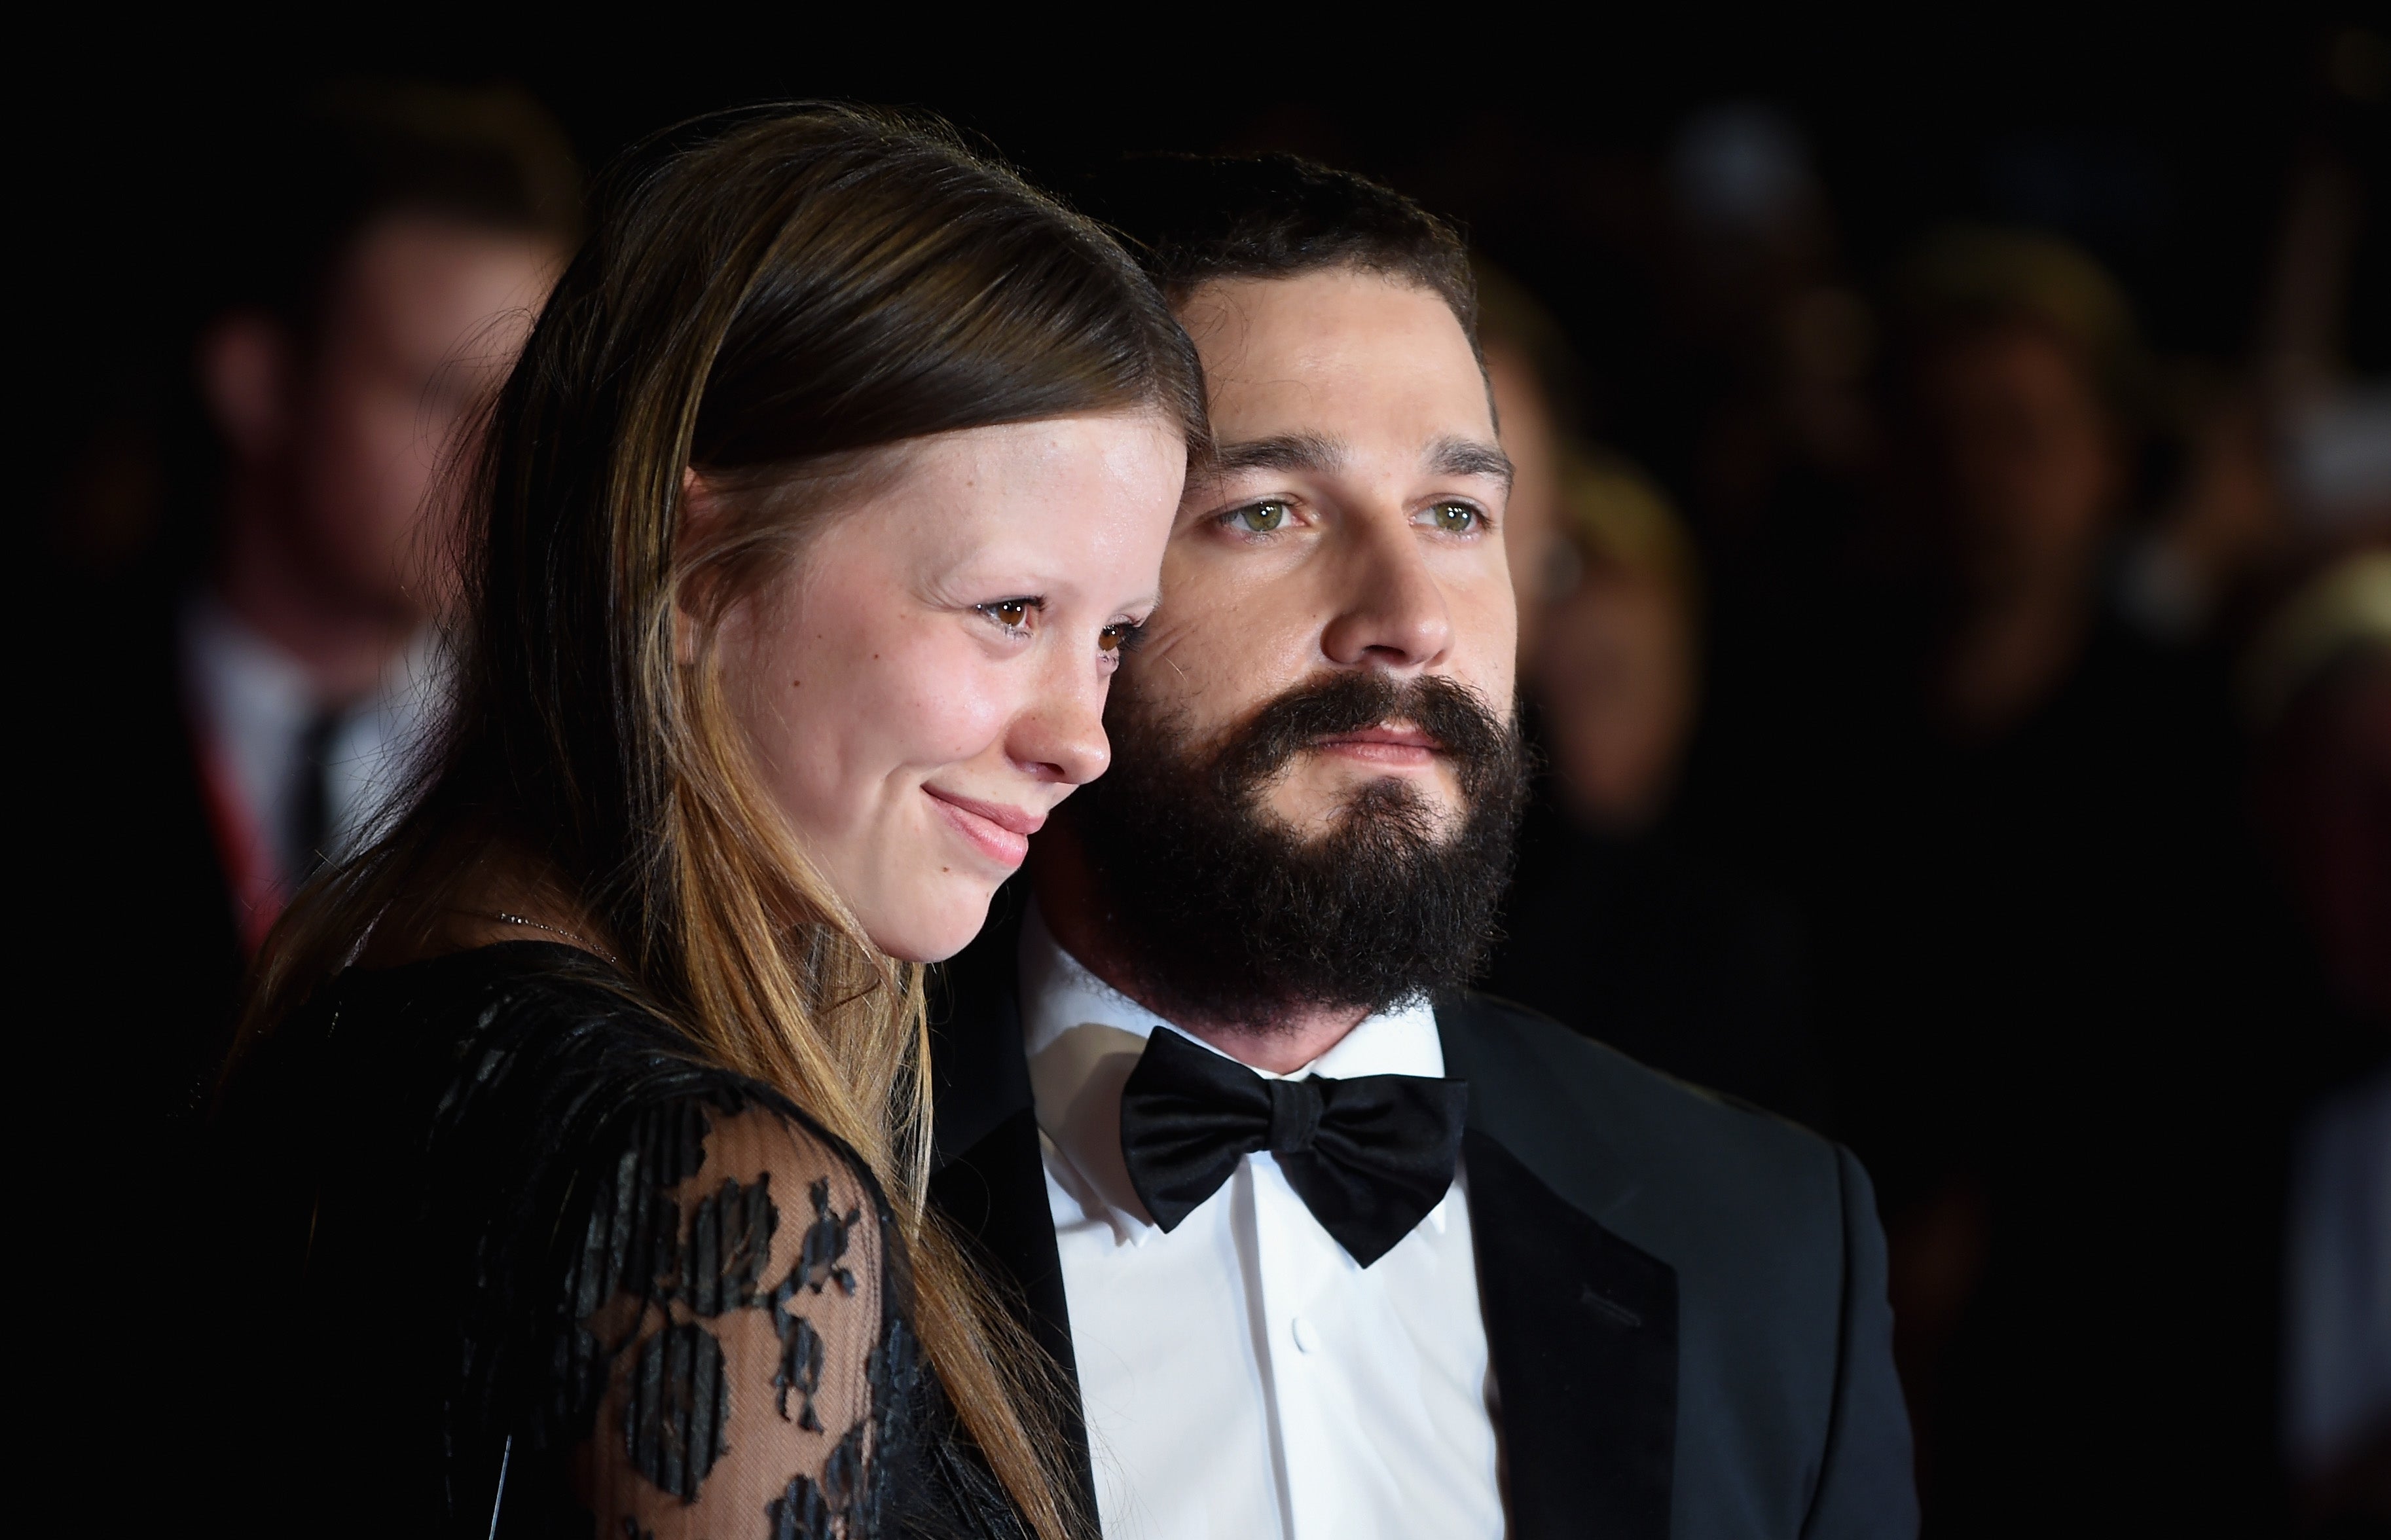 Mia Goth and actor Shia LeBeouf attend the closing night European Premiere gala red carpet arrivals for "Fury" during the 58th BFI London Film Festival at Odeon Leicester Square on October 19, 2014 in London, England